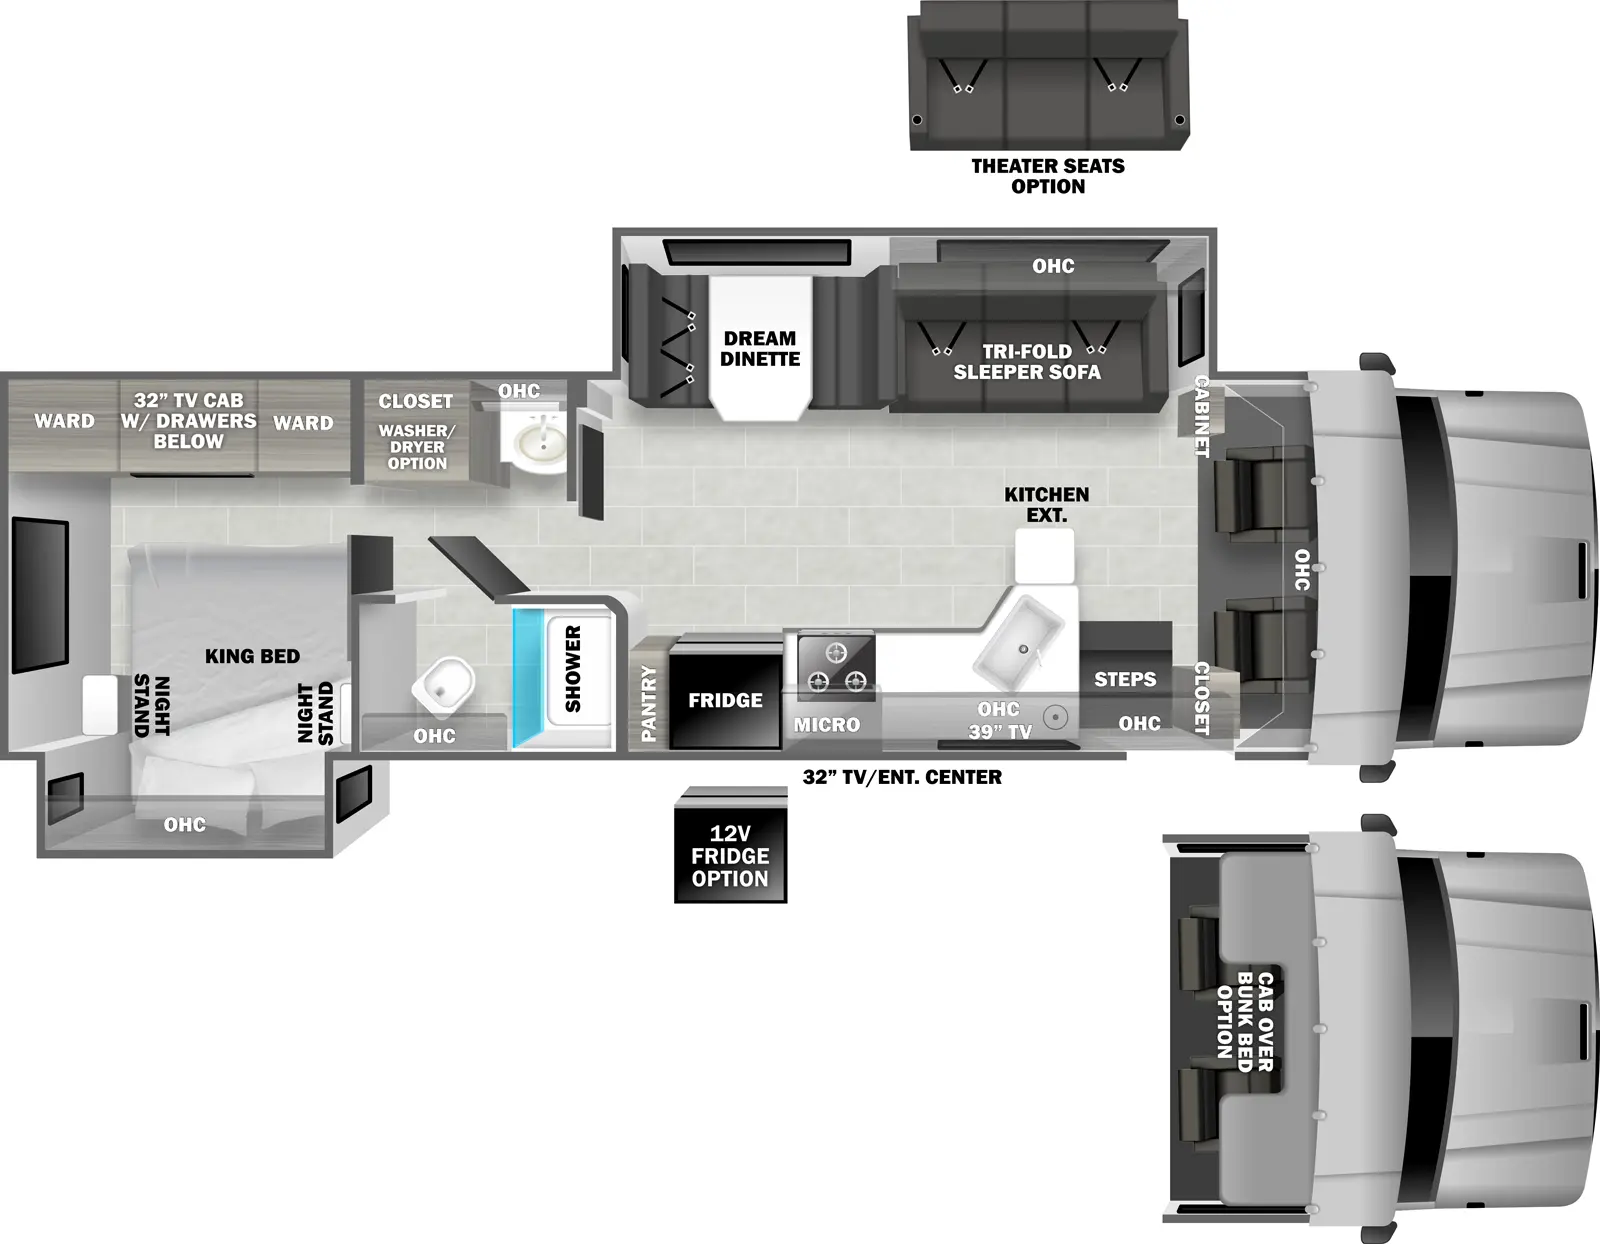 The 34KD has two slideouts and one entry. Exterior features include a TV/entertainment center. Interior layout front to back: cockpit with overhead cabinet (optional cab over bunk bed); off-door side cabinet, and slideout with tri-fold sleeper sofa (optional theater seating), overhead cabinet, and dream dinette; door side closet, entry, overhead cabinet, kitchen counter with extension, sink, TV, microwave, cooktop, refrigerator (optional 12V refrigerator), and pantry; pass through bathroom with toilet, shower and overhead cabinet on the door side and sink, overhead cabinet and closet with optional washer/dryer on the off-door side; rear bedroom with king bed, overhead cabinet and nightstands in a door side slideout, and wardrobes, drawers and TV cabinet with drawers below on off-door side.